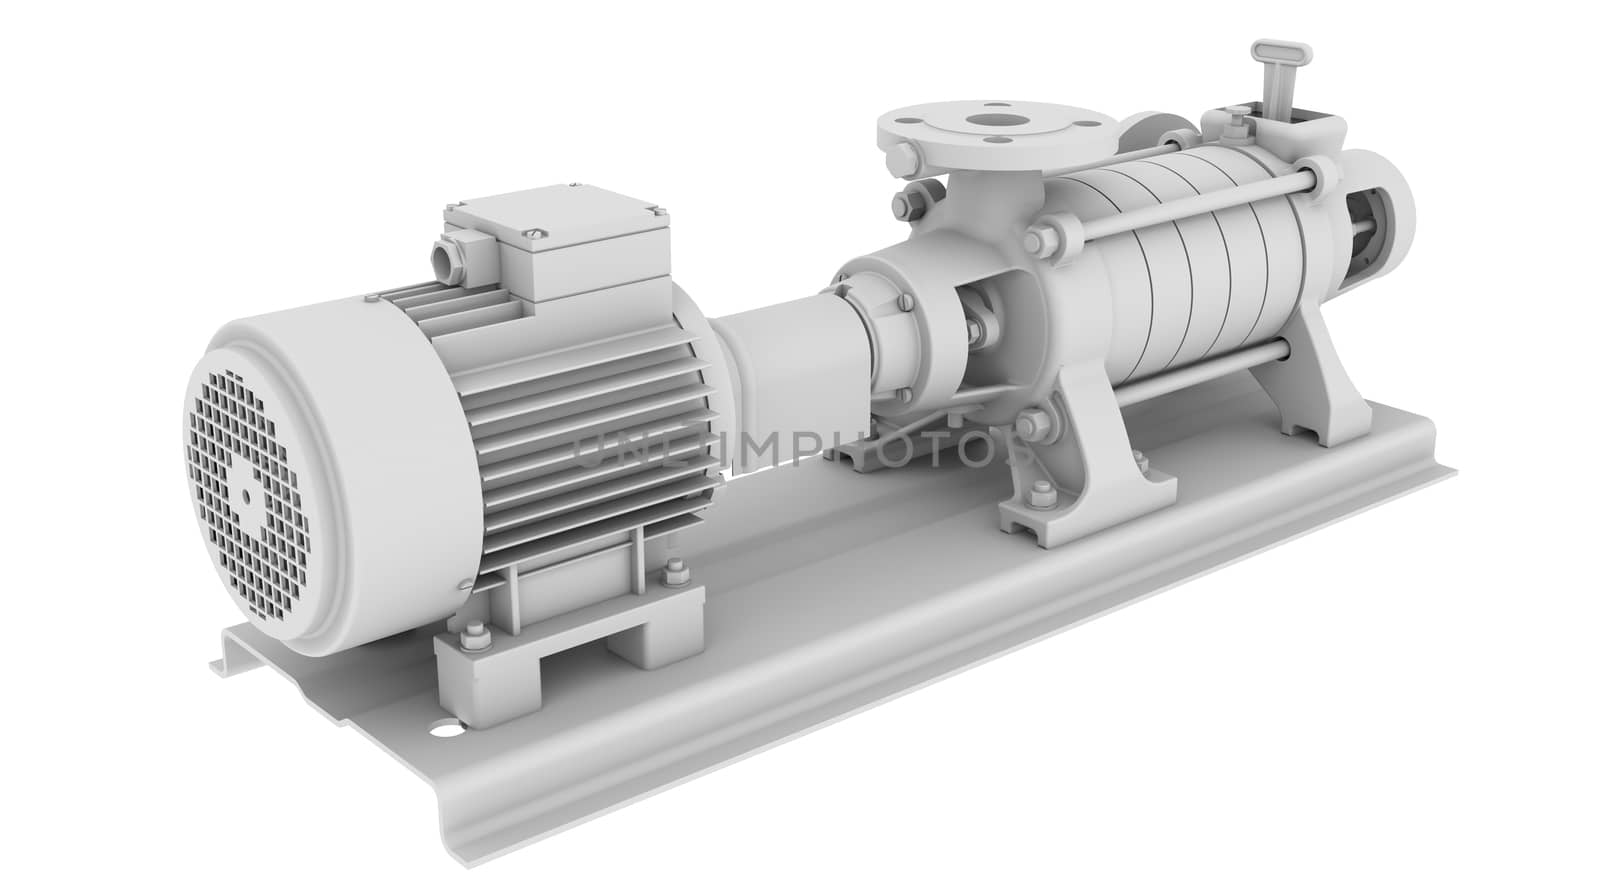 Water pump. Isolated render on the white background